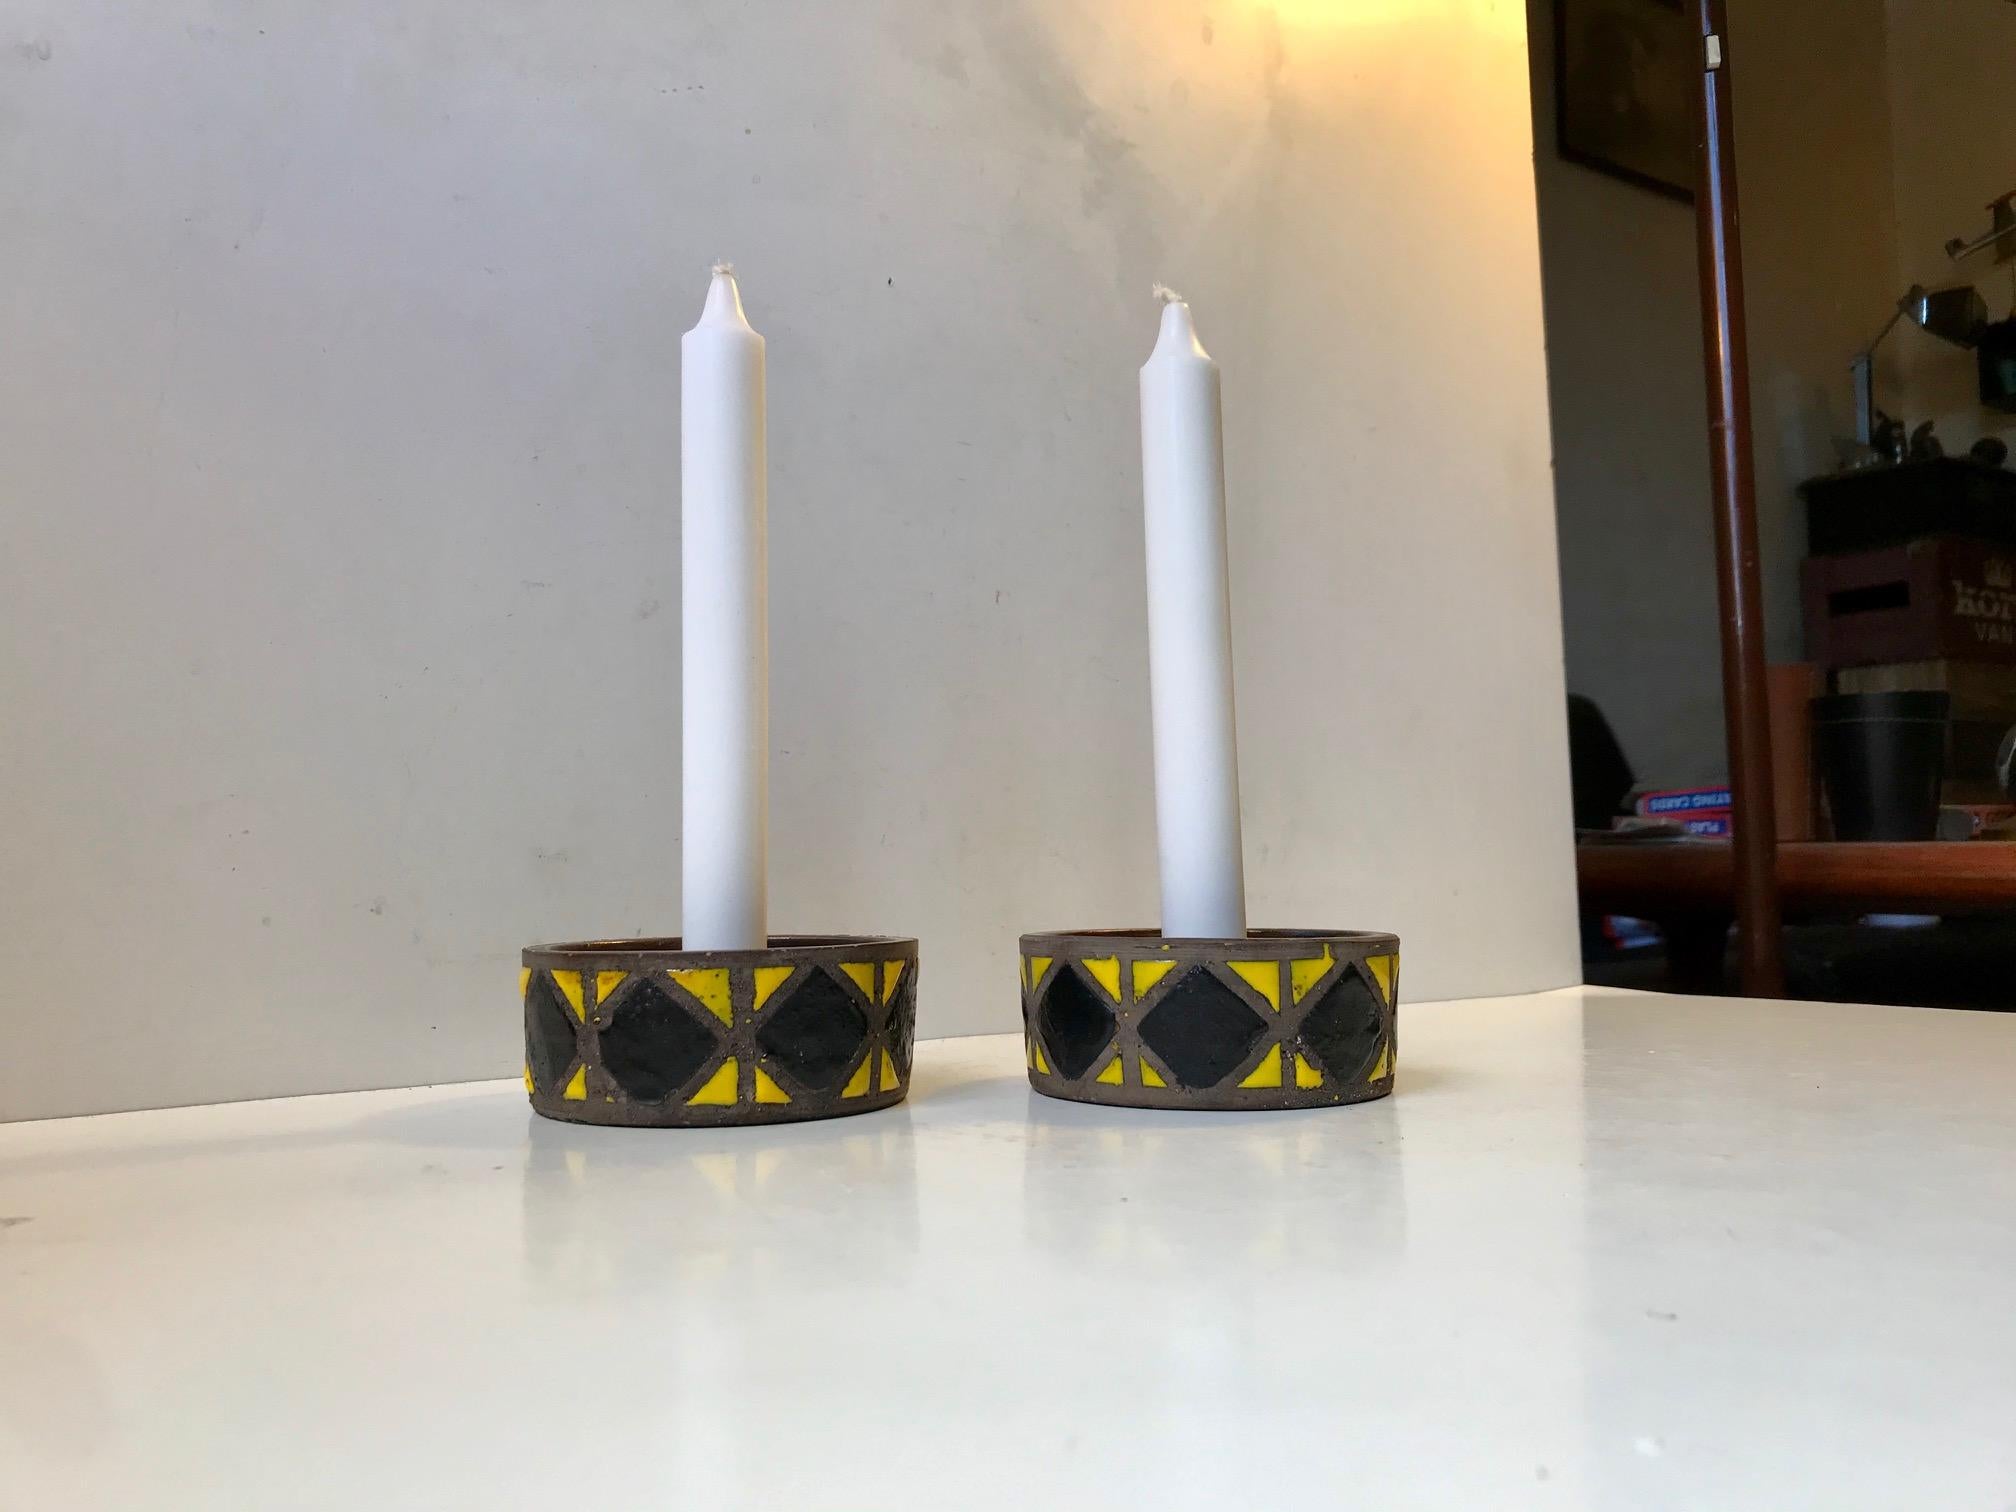 A pair of Italian stoneware candlesticks with yellow and black glaze. This pattern from Aldo Londi is called Wax decor. Manufactured by Bitossi in Italy in the late 1960s. They are to be installed with regular sized candles.